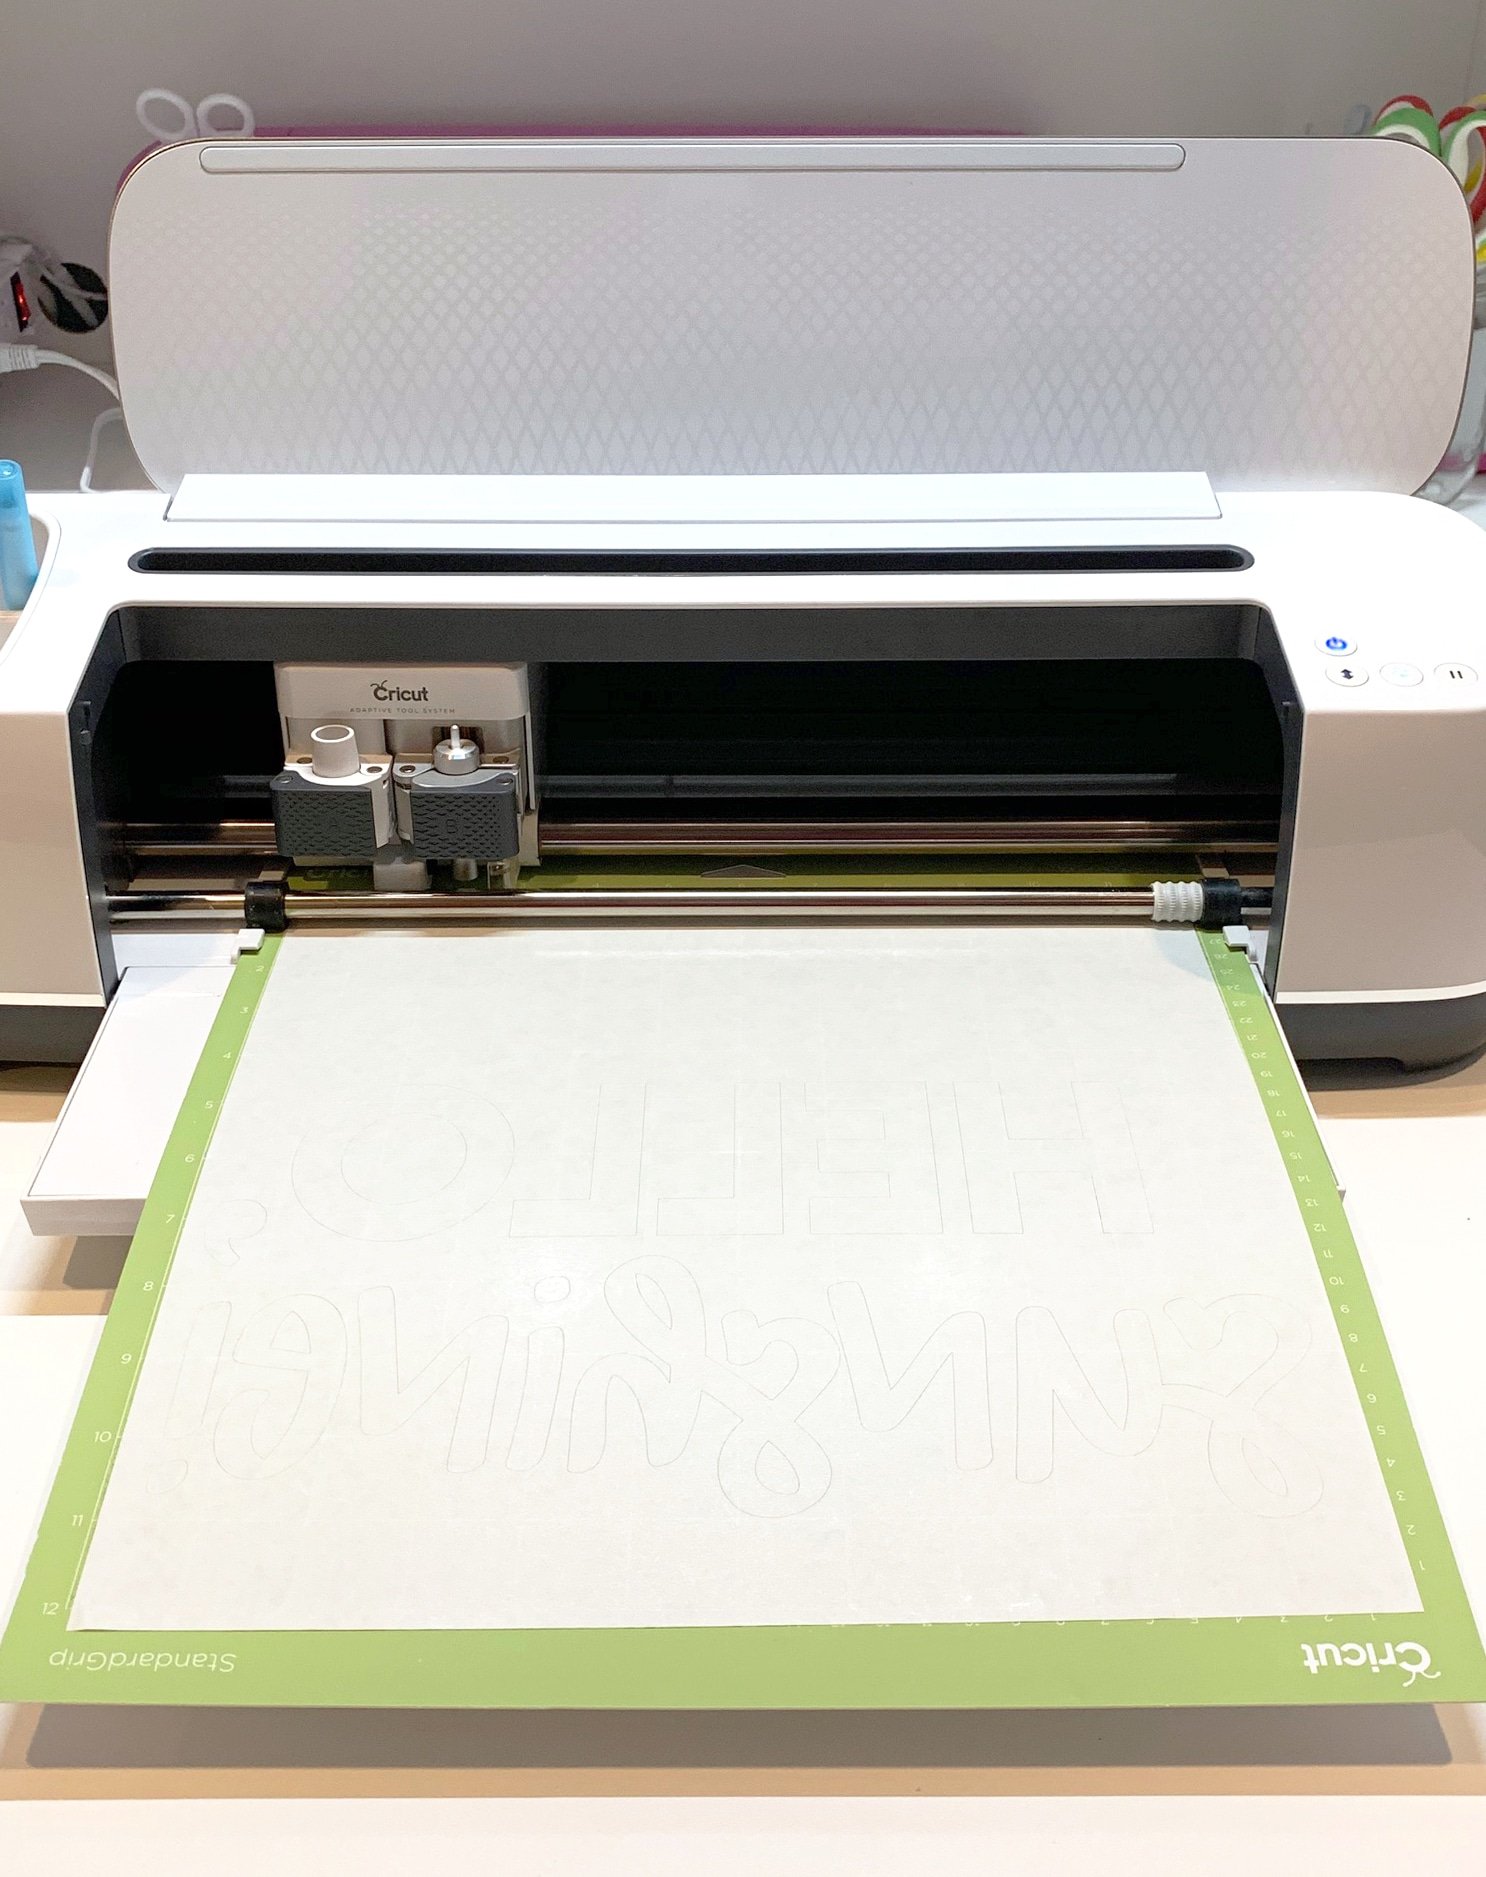 cricut with material loaded onto mat